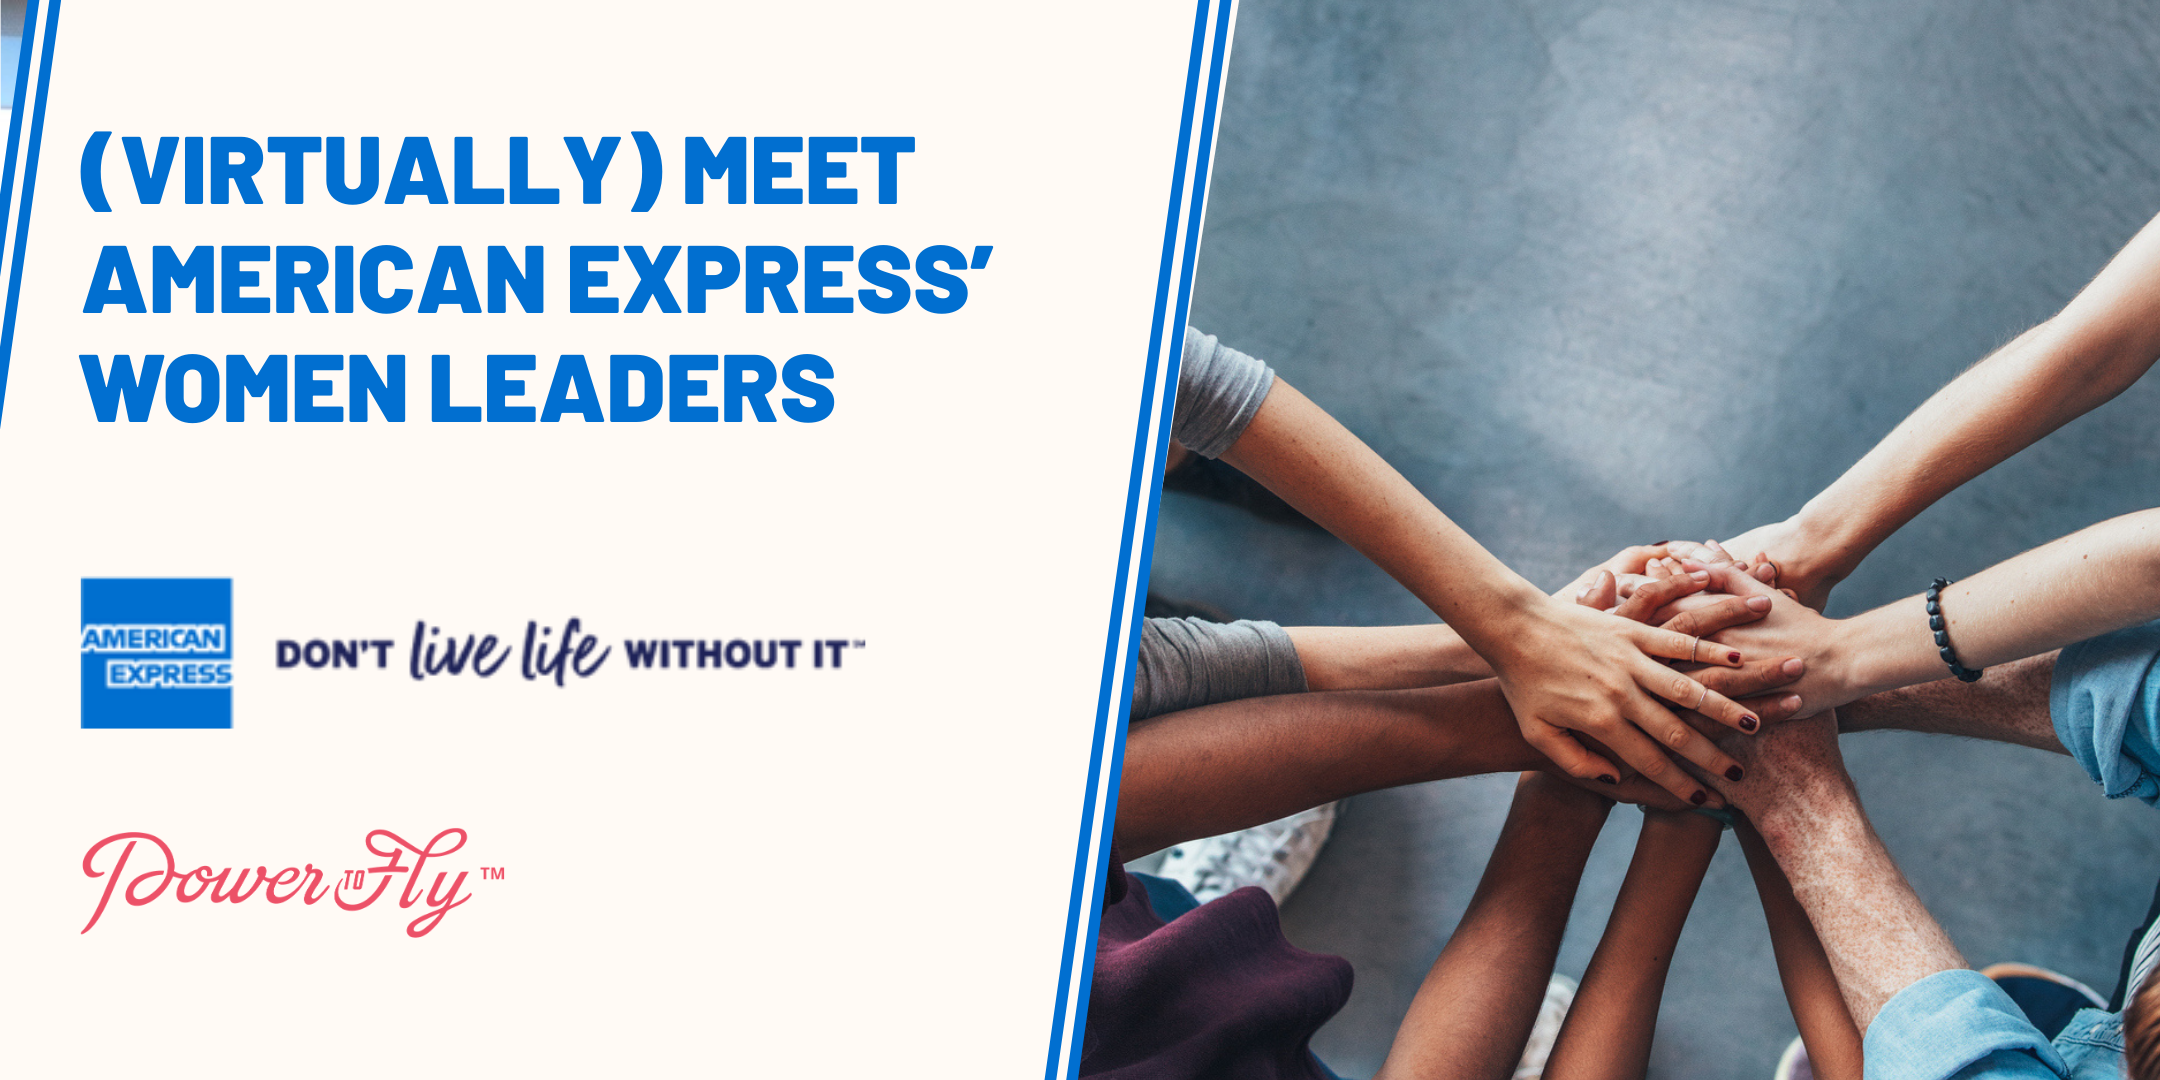 Watch Two Virtual Events with Leaders from America Express